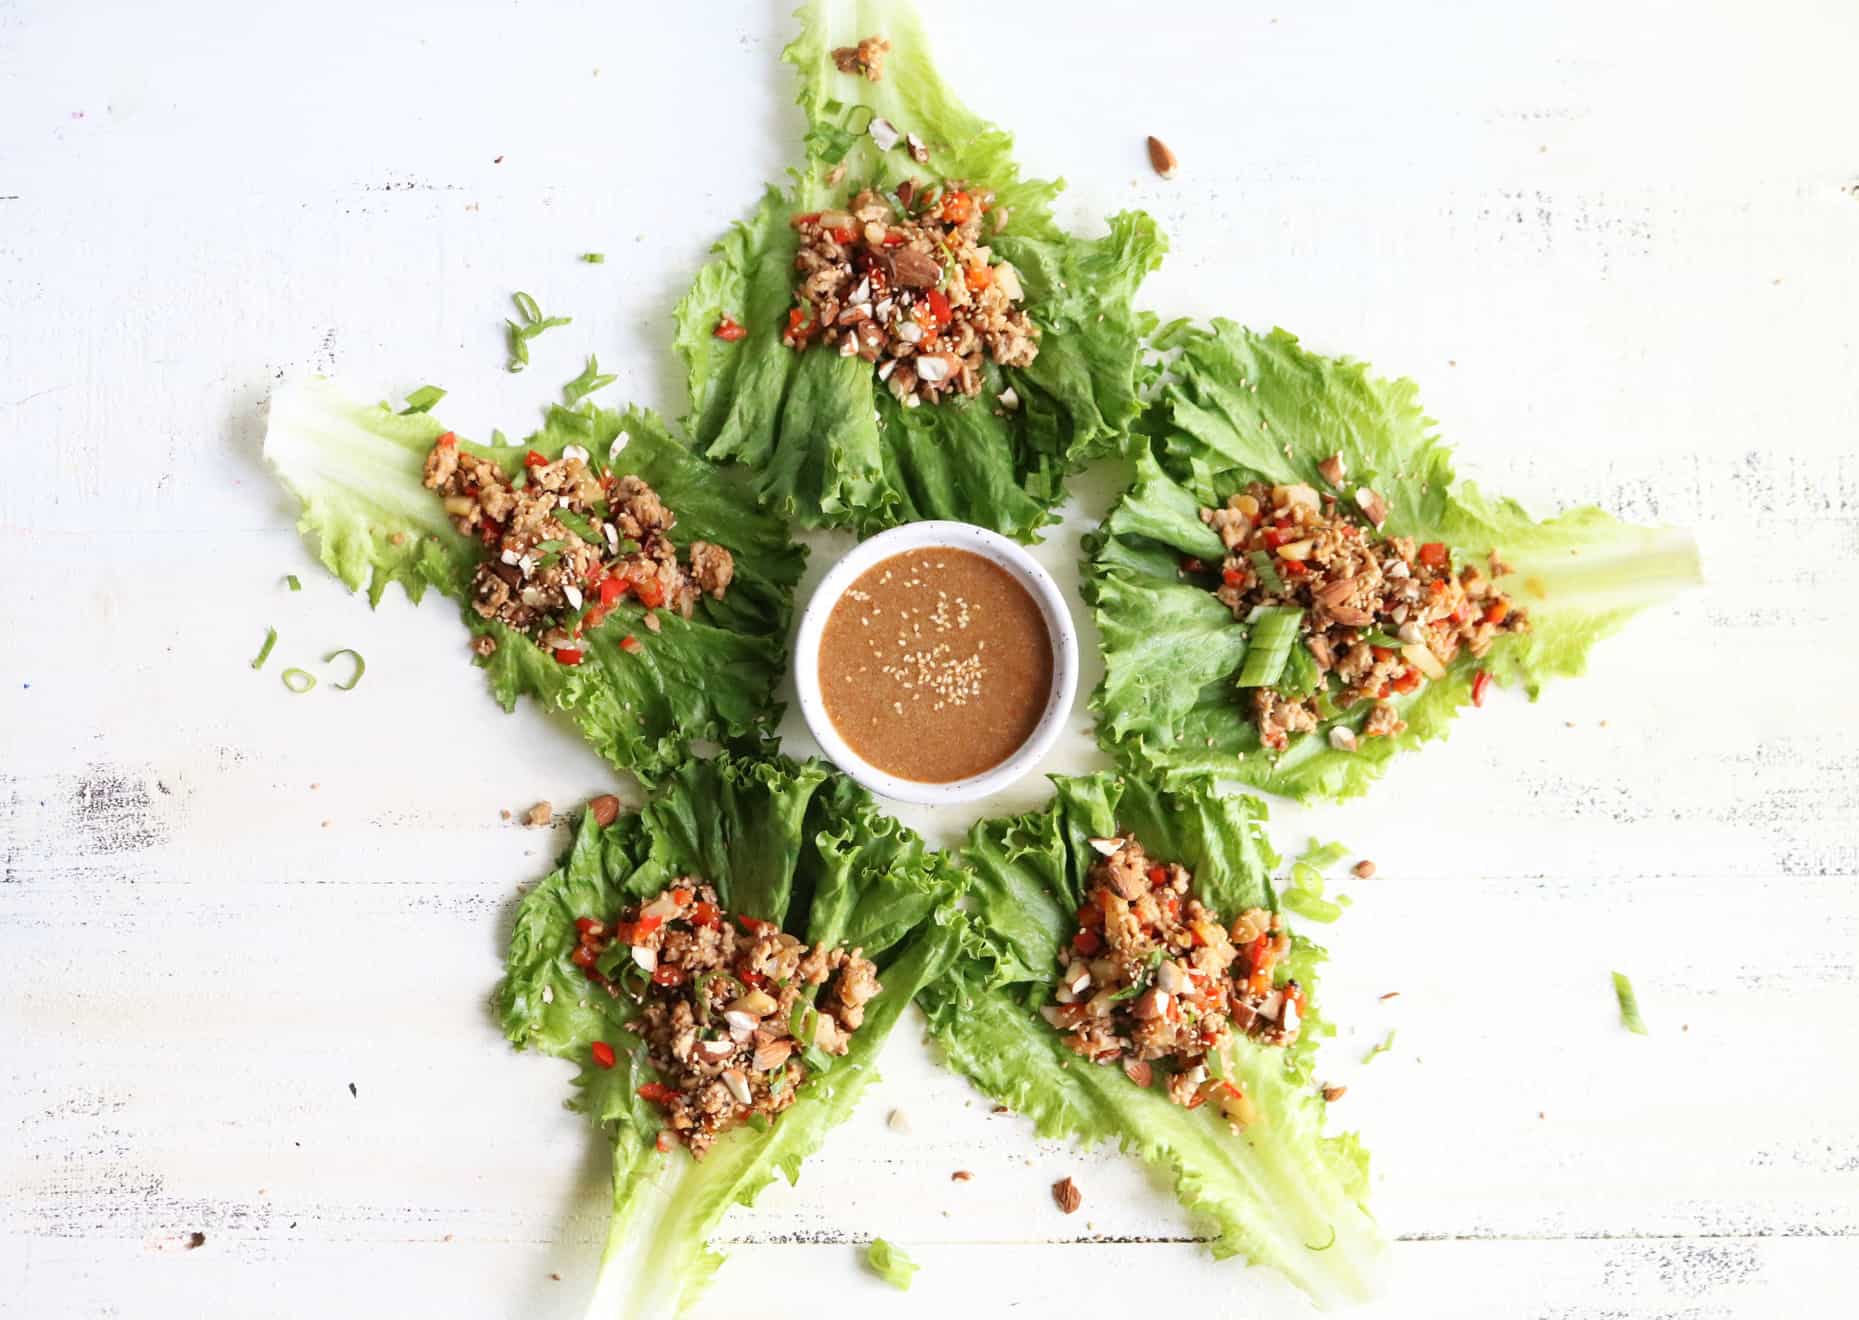 This is an overhead view of five chicken lettuce wraps on a white surface. The lettuce wraps are arranged around a small white bowl with sauce in it. 